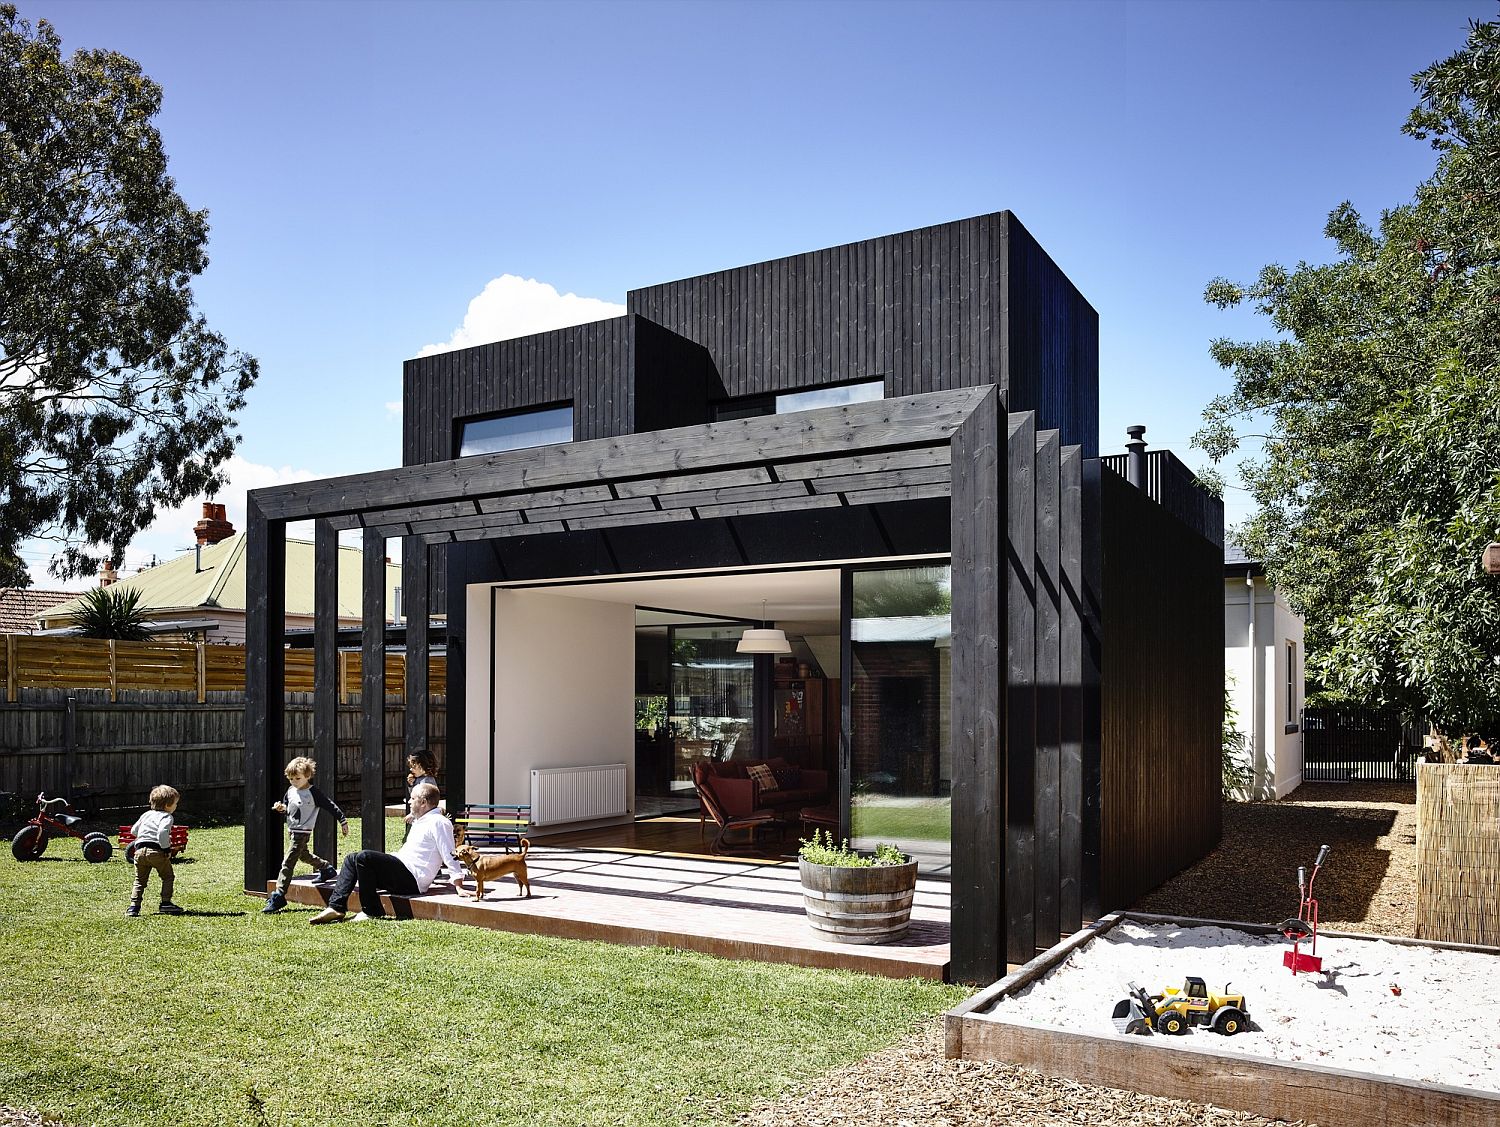 Series of simple structures give the old Victorian home a stylish makeover